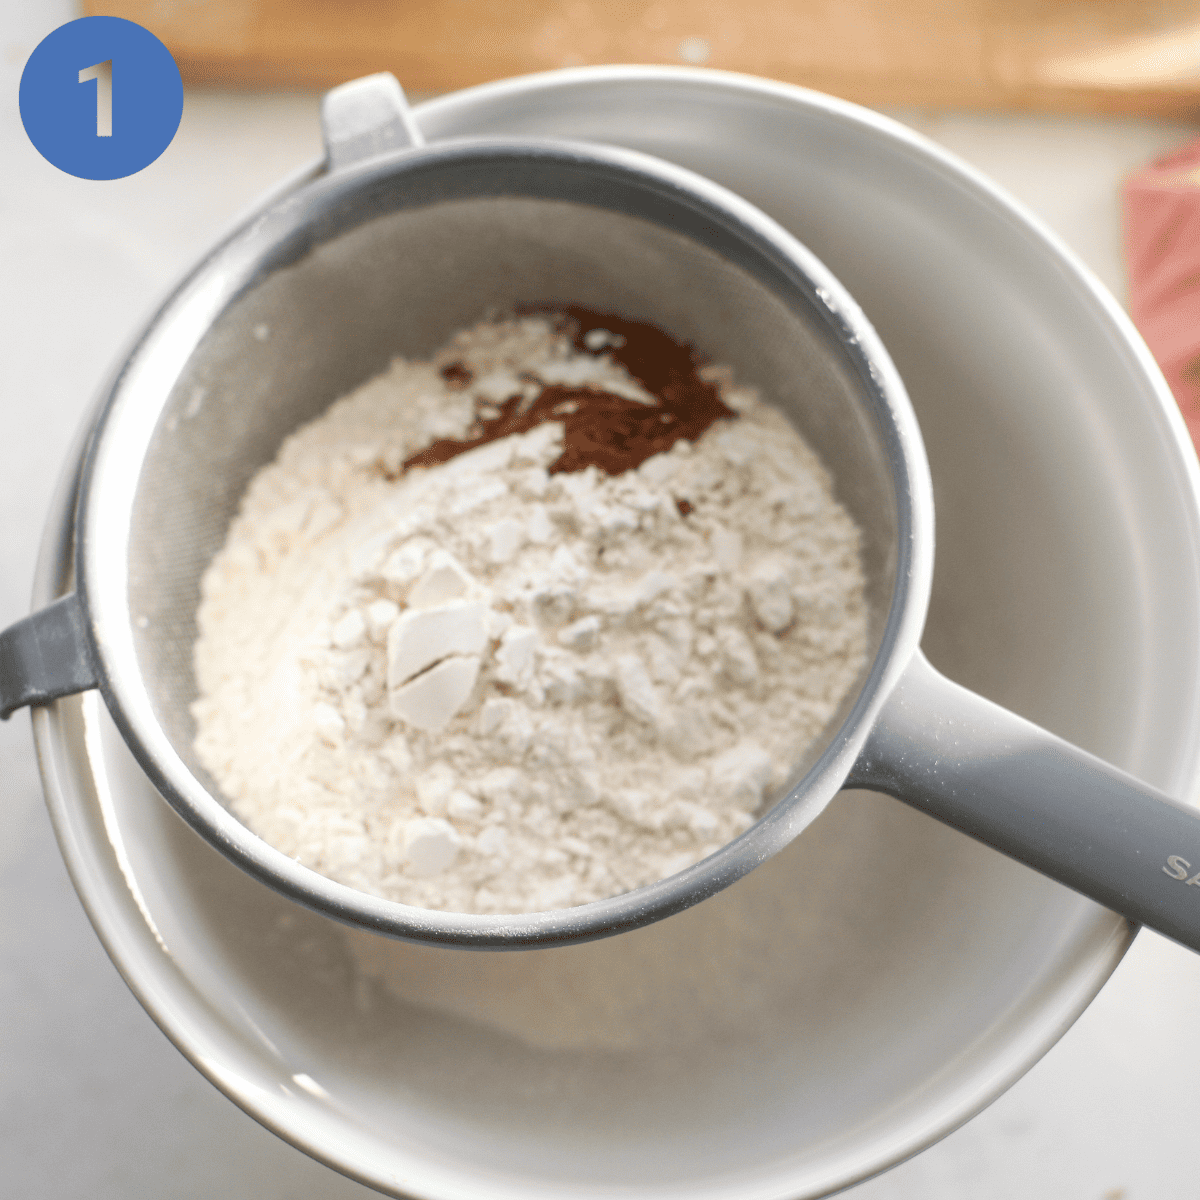 Sifting flour and spice into a mixing bowl.